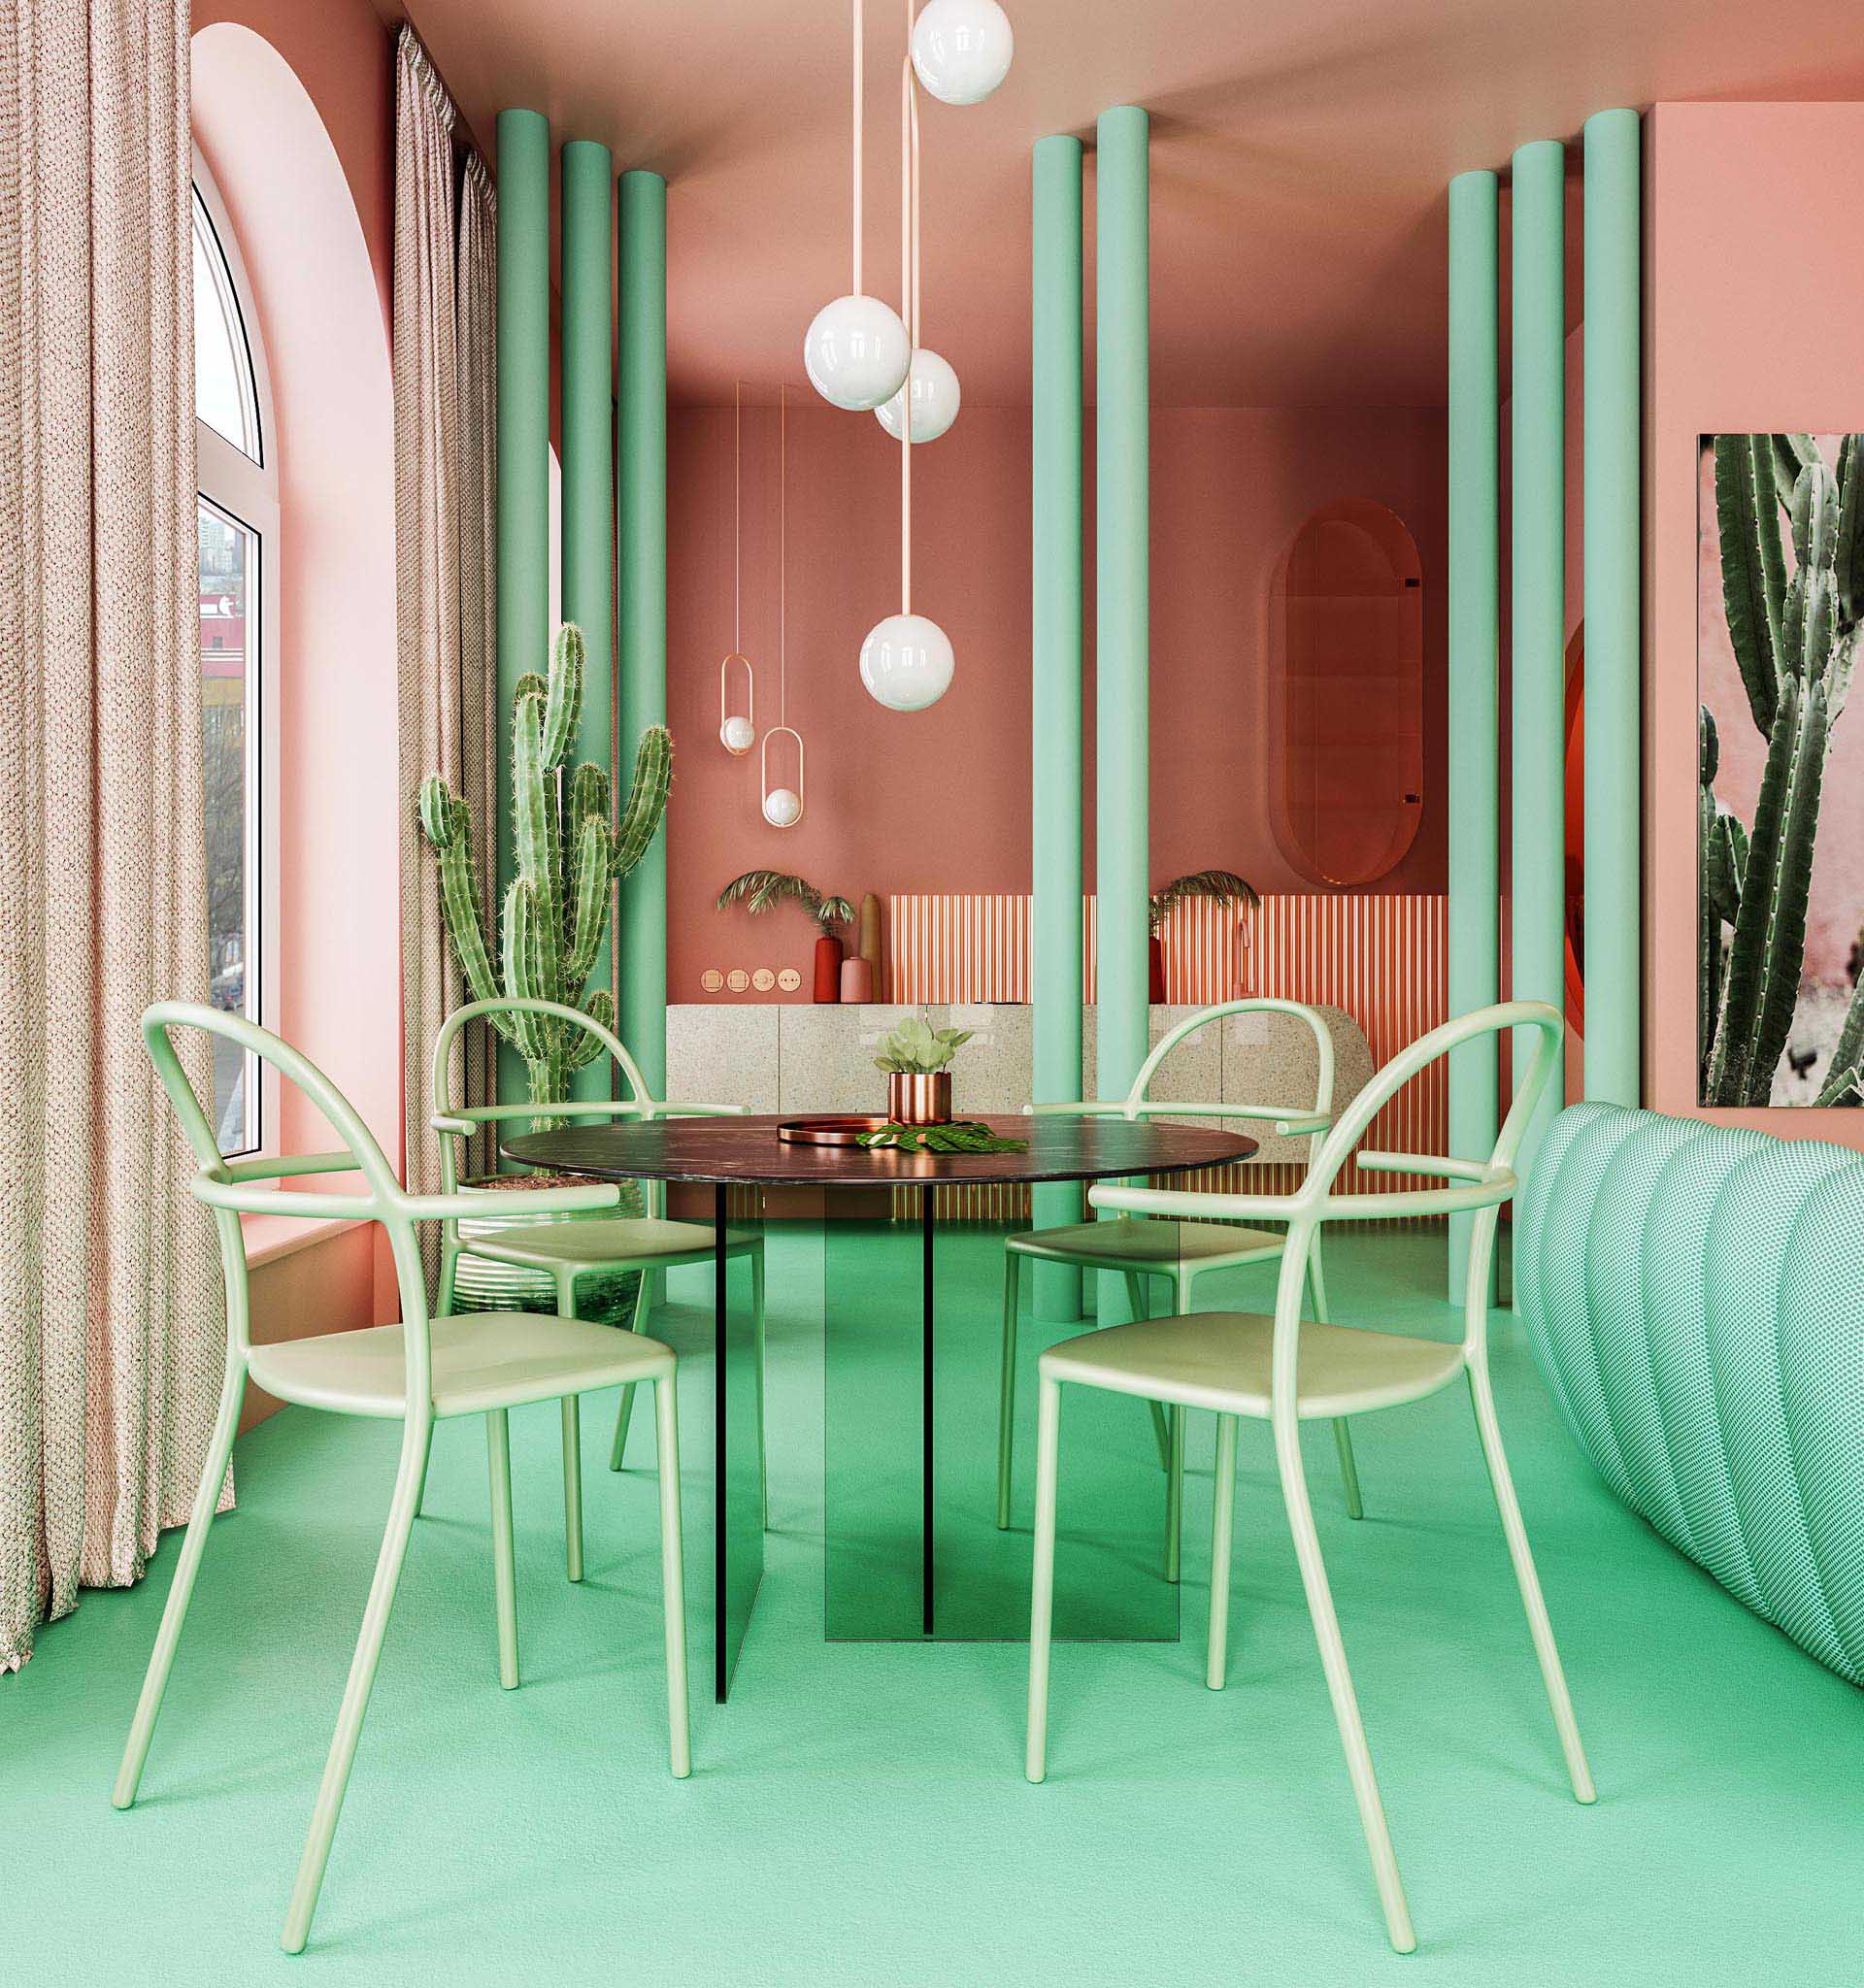 A Pastel Pink And Mint Green Color Palette Creates A Statement Interior For  This New York Apartment